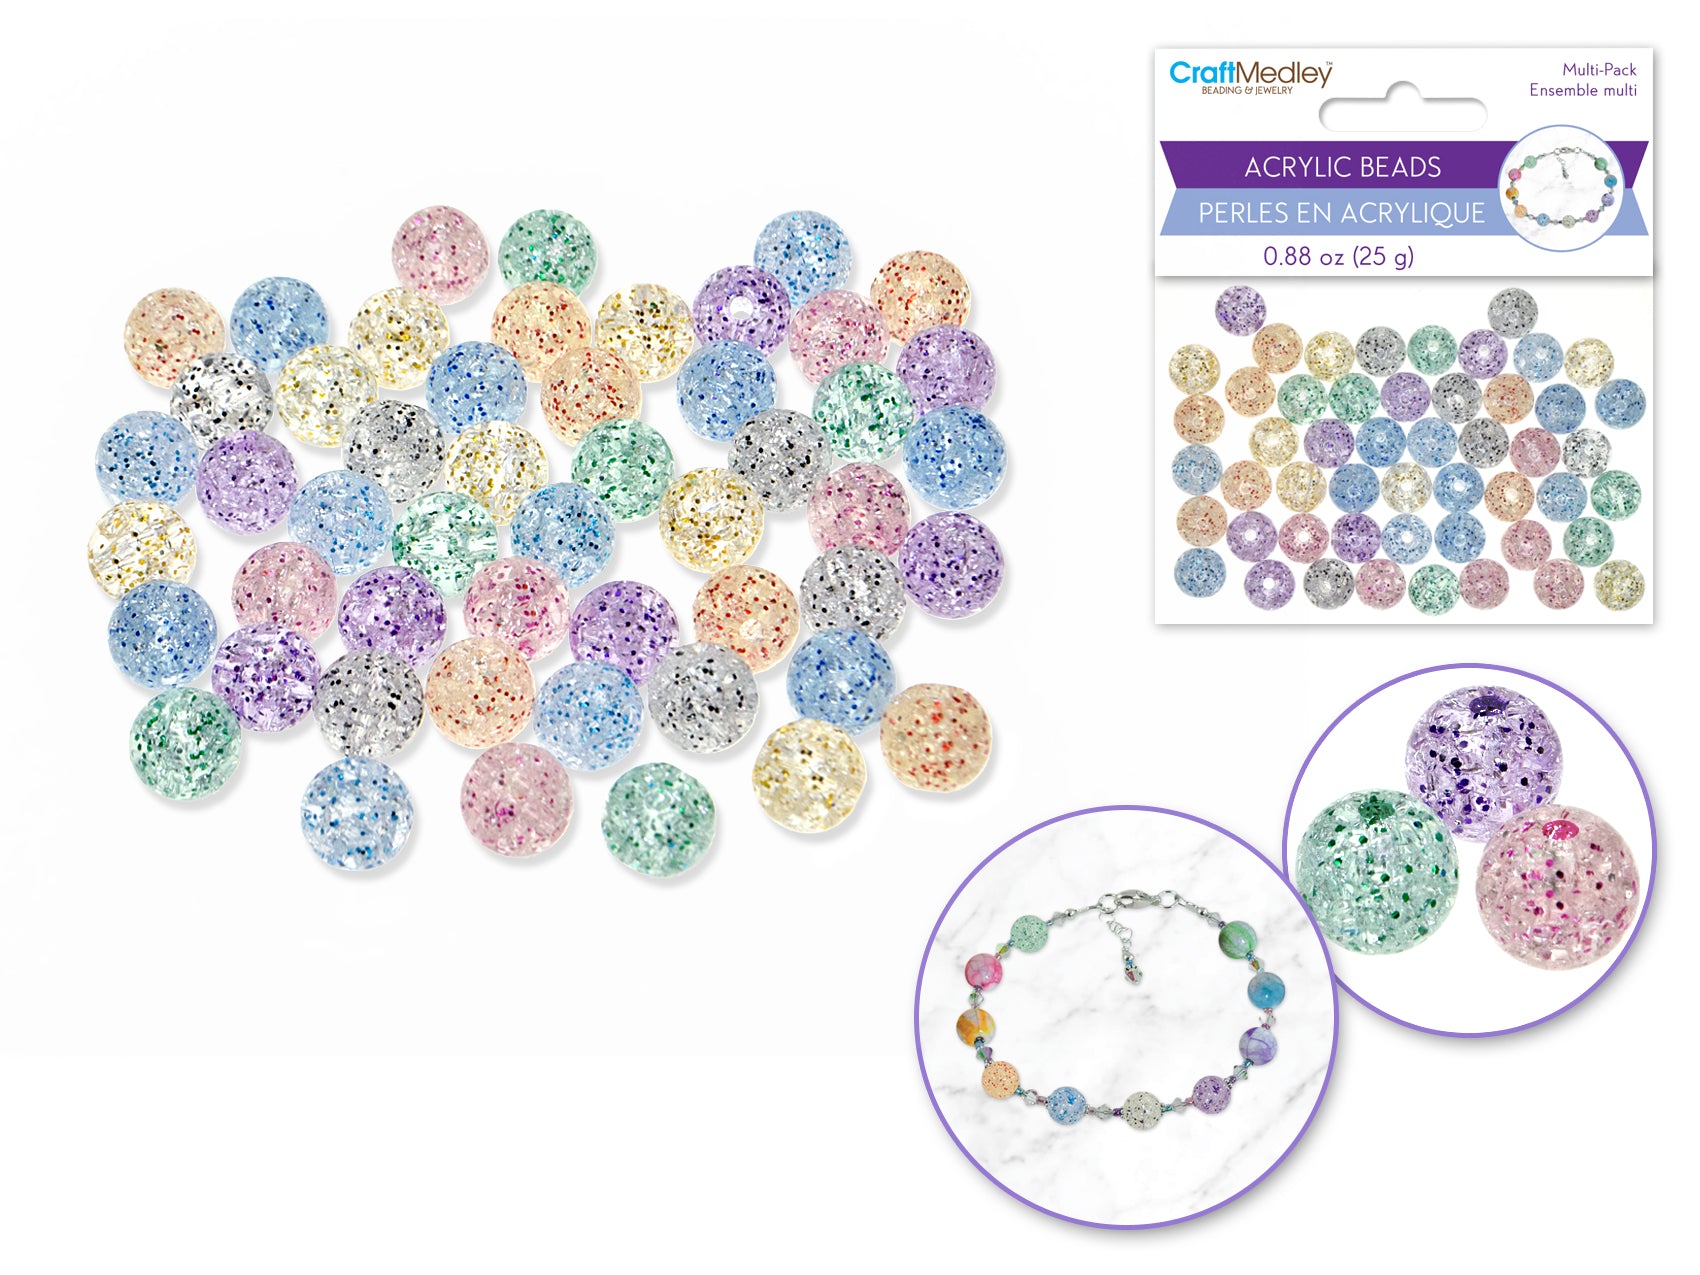 Acrylic Beads: Crackled Glitter, 10mm Round, Available in 25g Multi-Packs